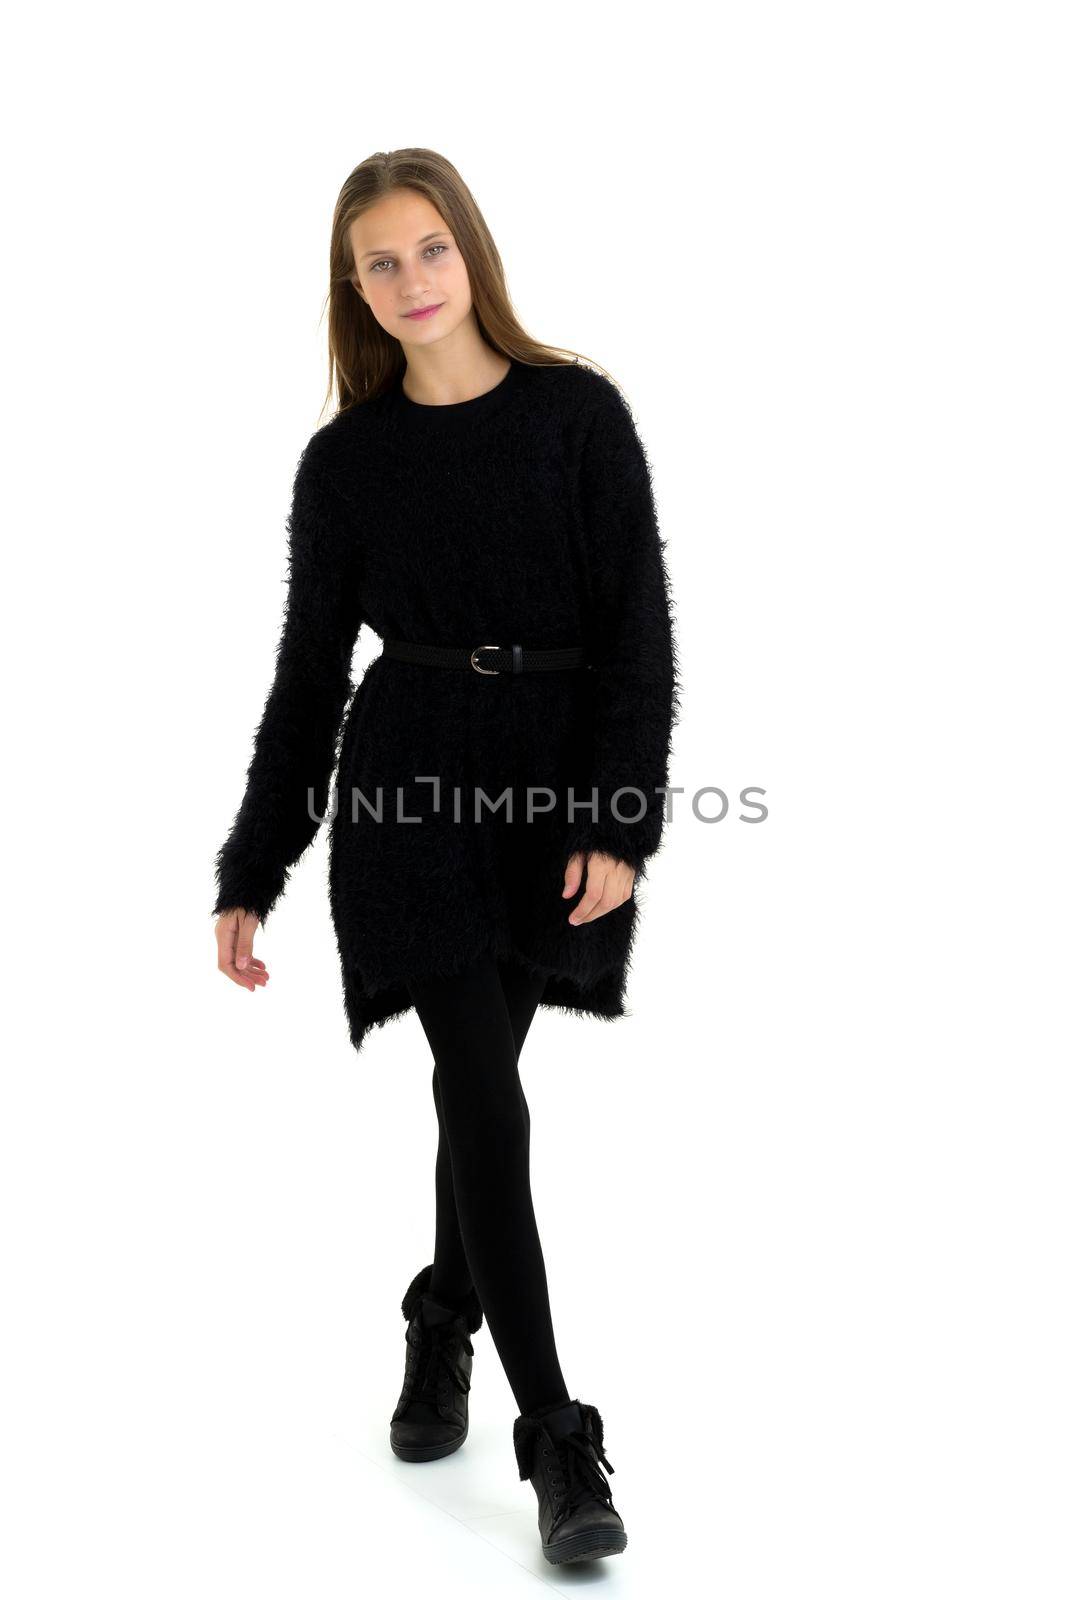 Happy teenage girl in fashionable black outfit. Full length portrait of beautiful girl with long straight hair wearing black dress, stockings and boots standing against white background in studio